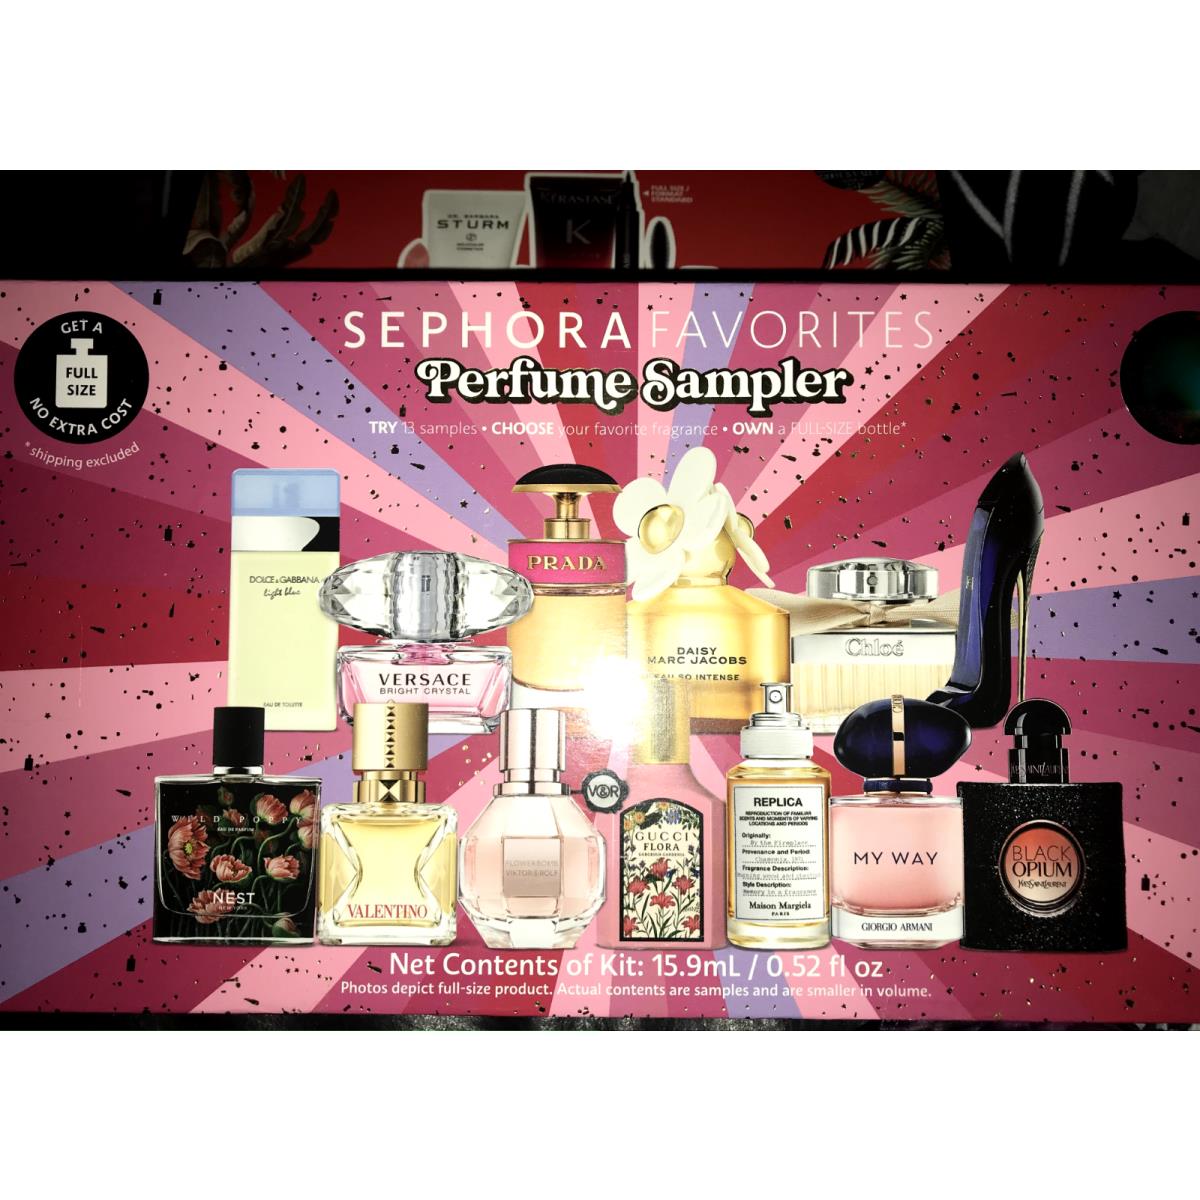 Sephora Favorites Perfume Sampler with Certificate Holiday Armani Gucci Nest